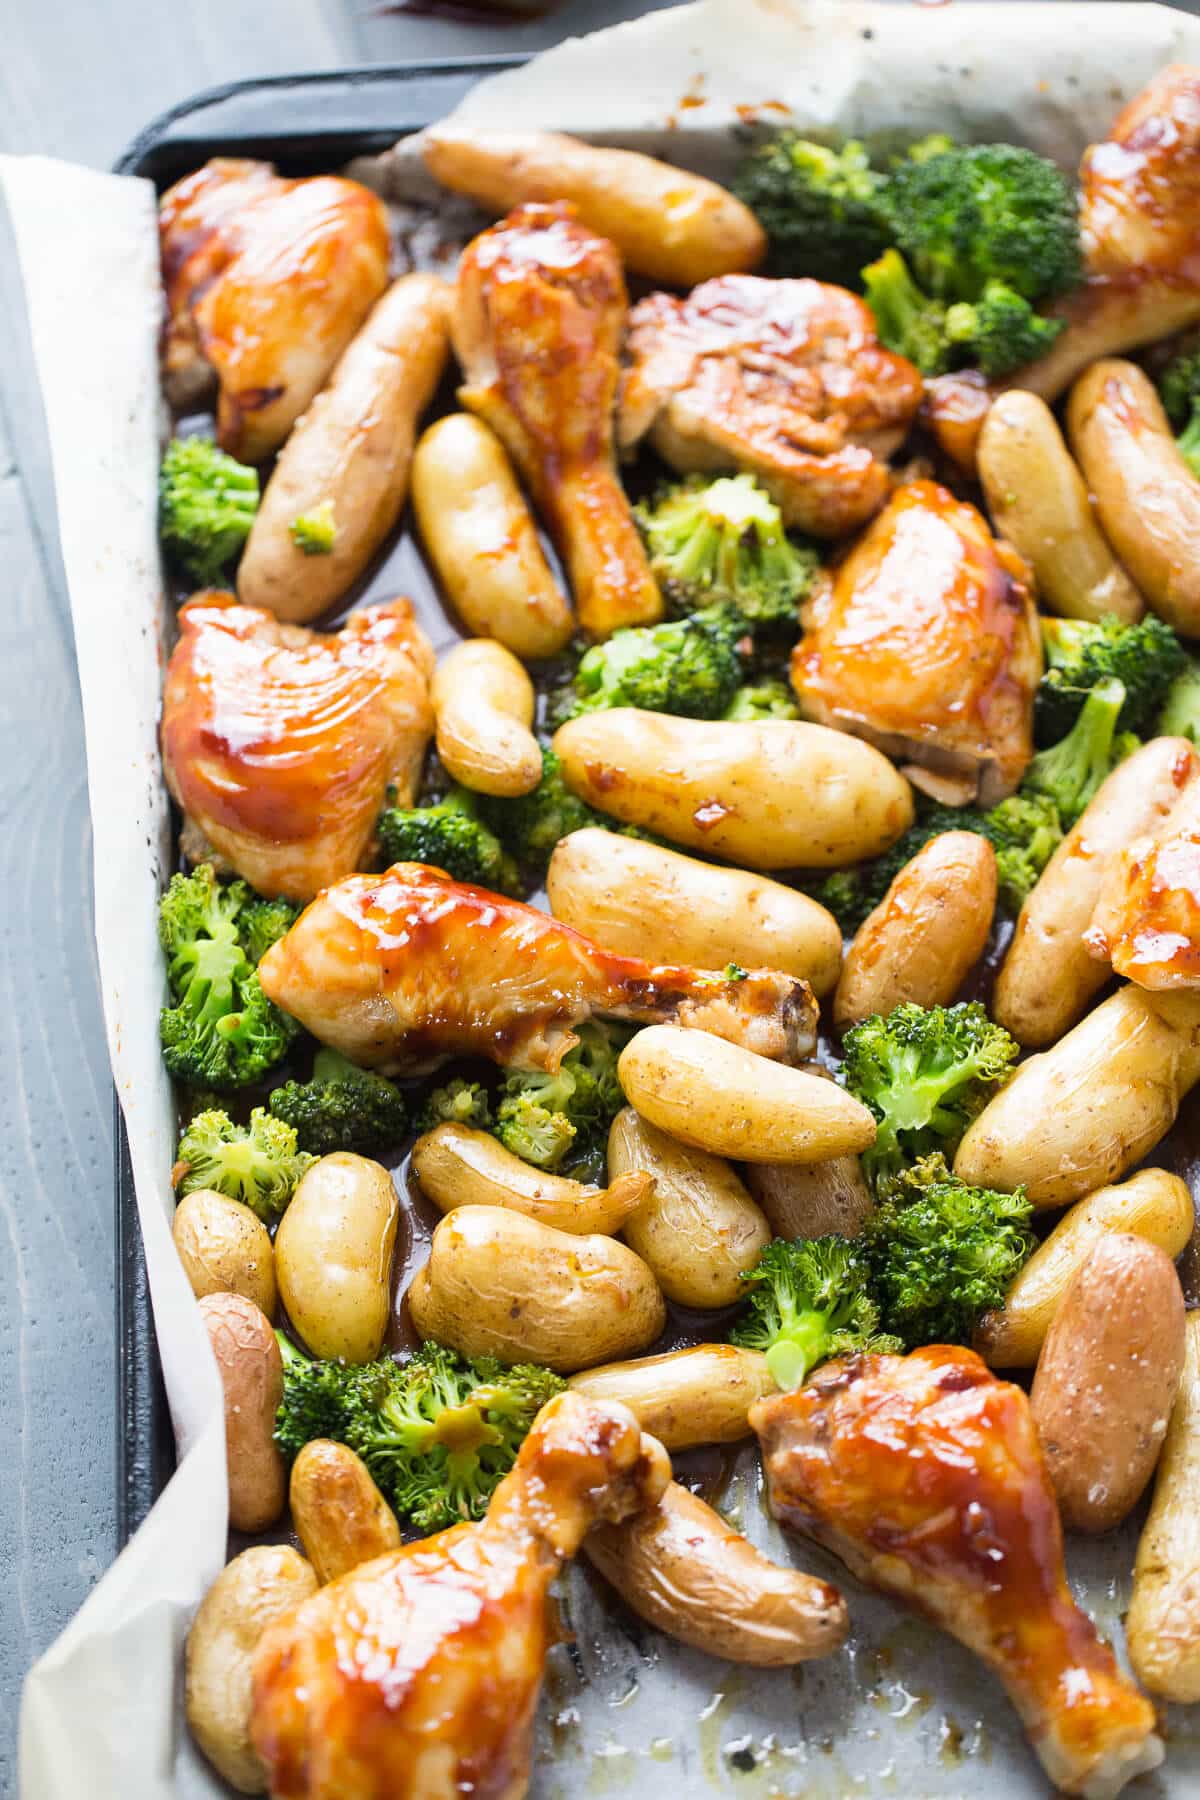 A sheet pan dinner is so easy! Bourbon Chicken is baked and tossed with potatoes and broccoli. The bourbon sauce is subtly sweet and coats each piece perfectly!